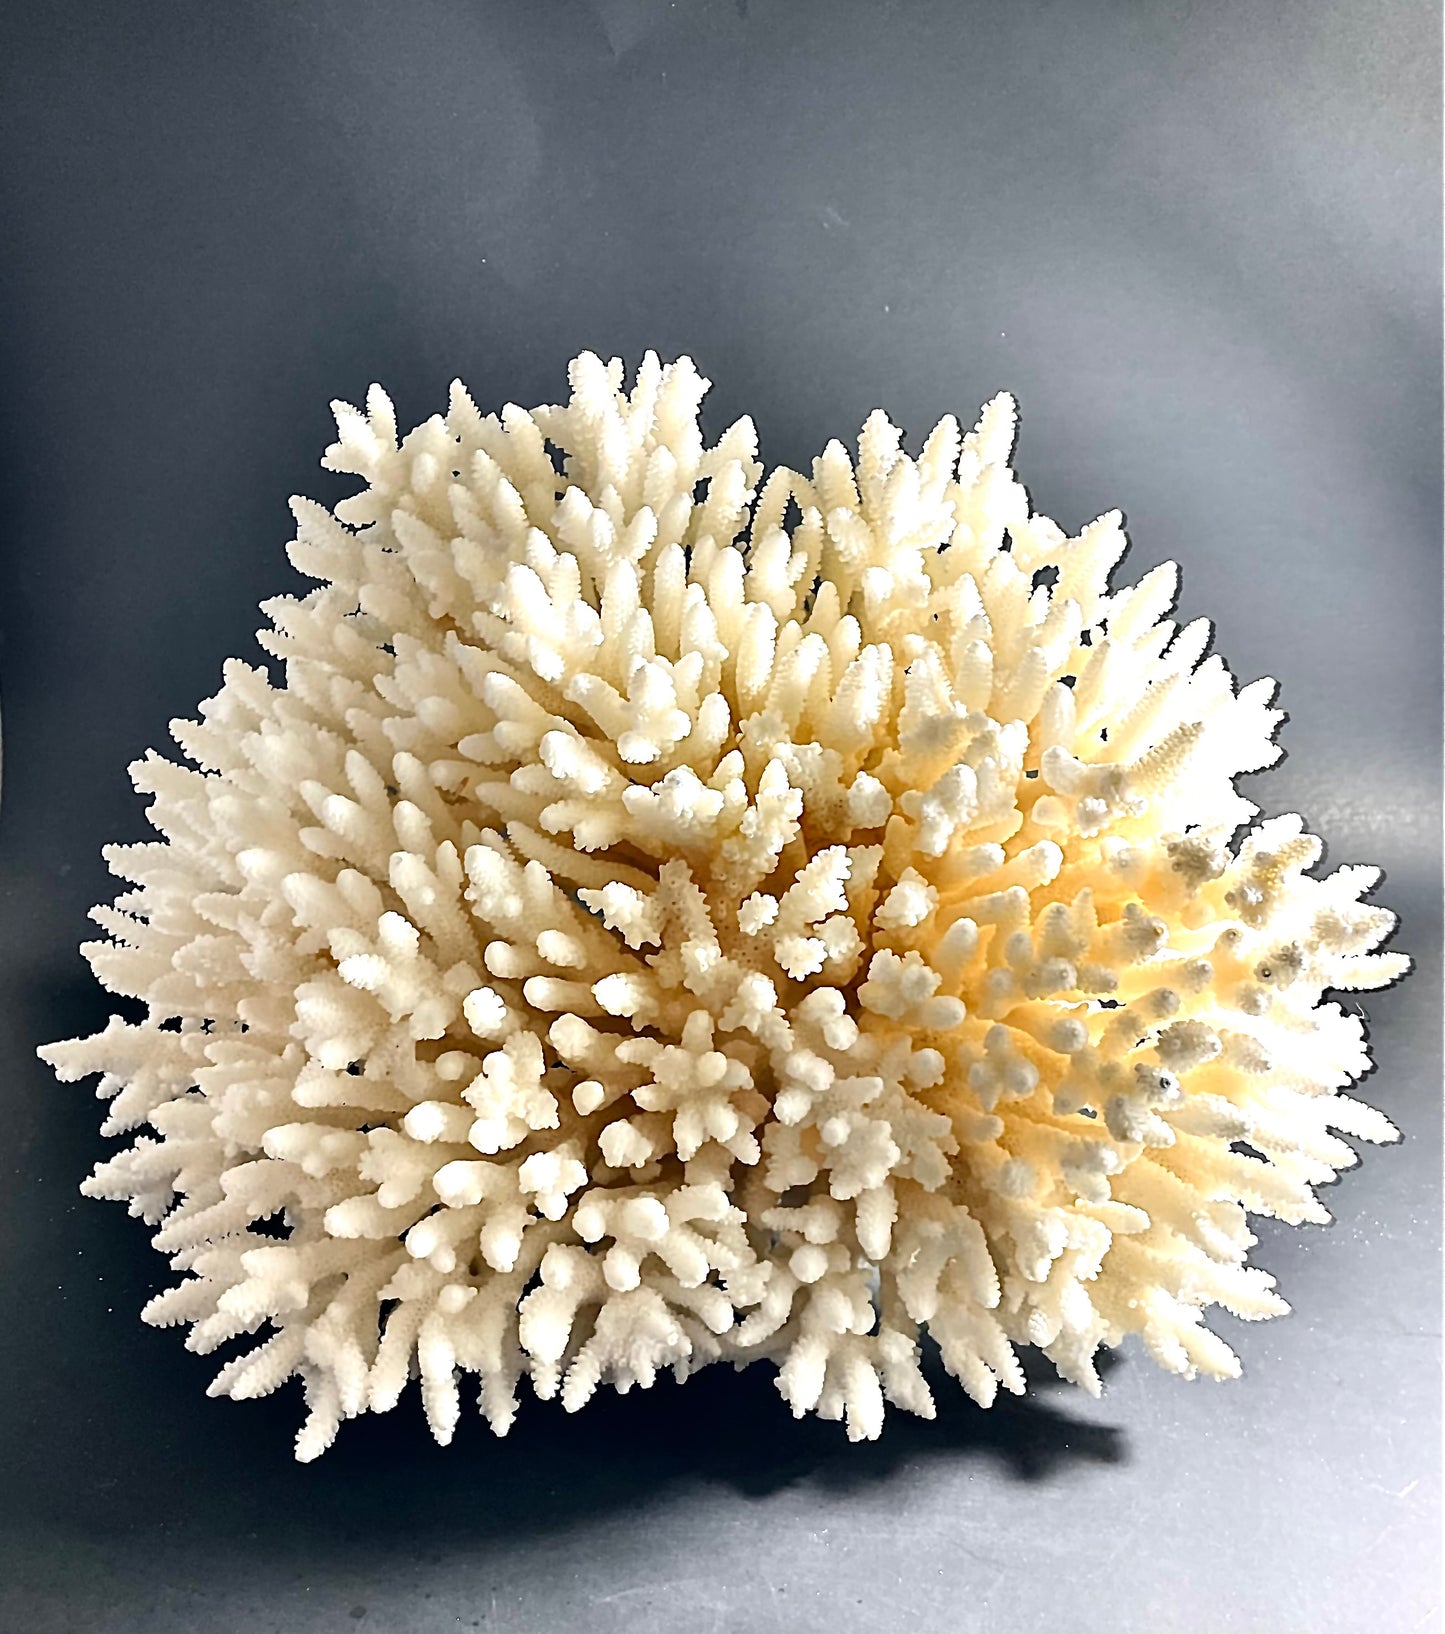 Table Coral (14”x13”)